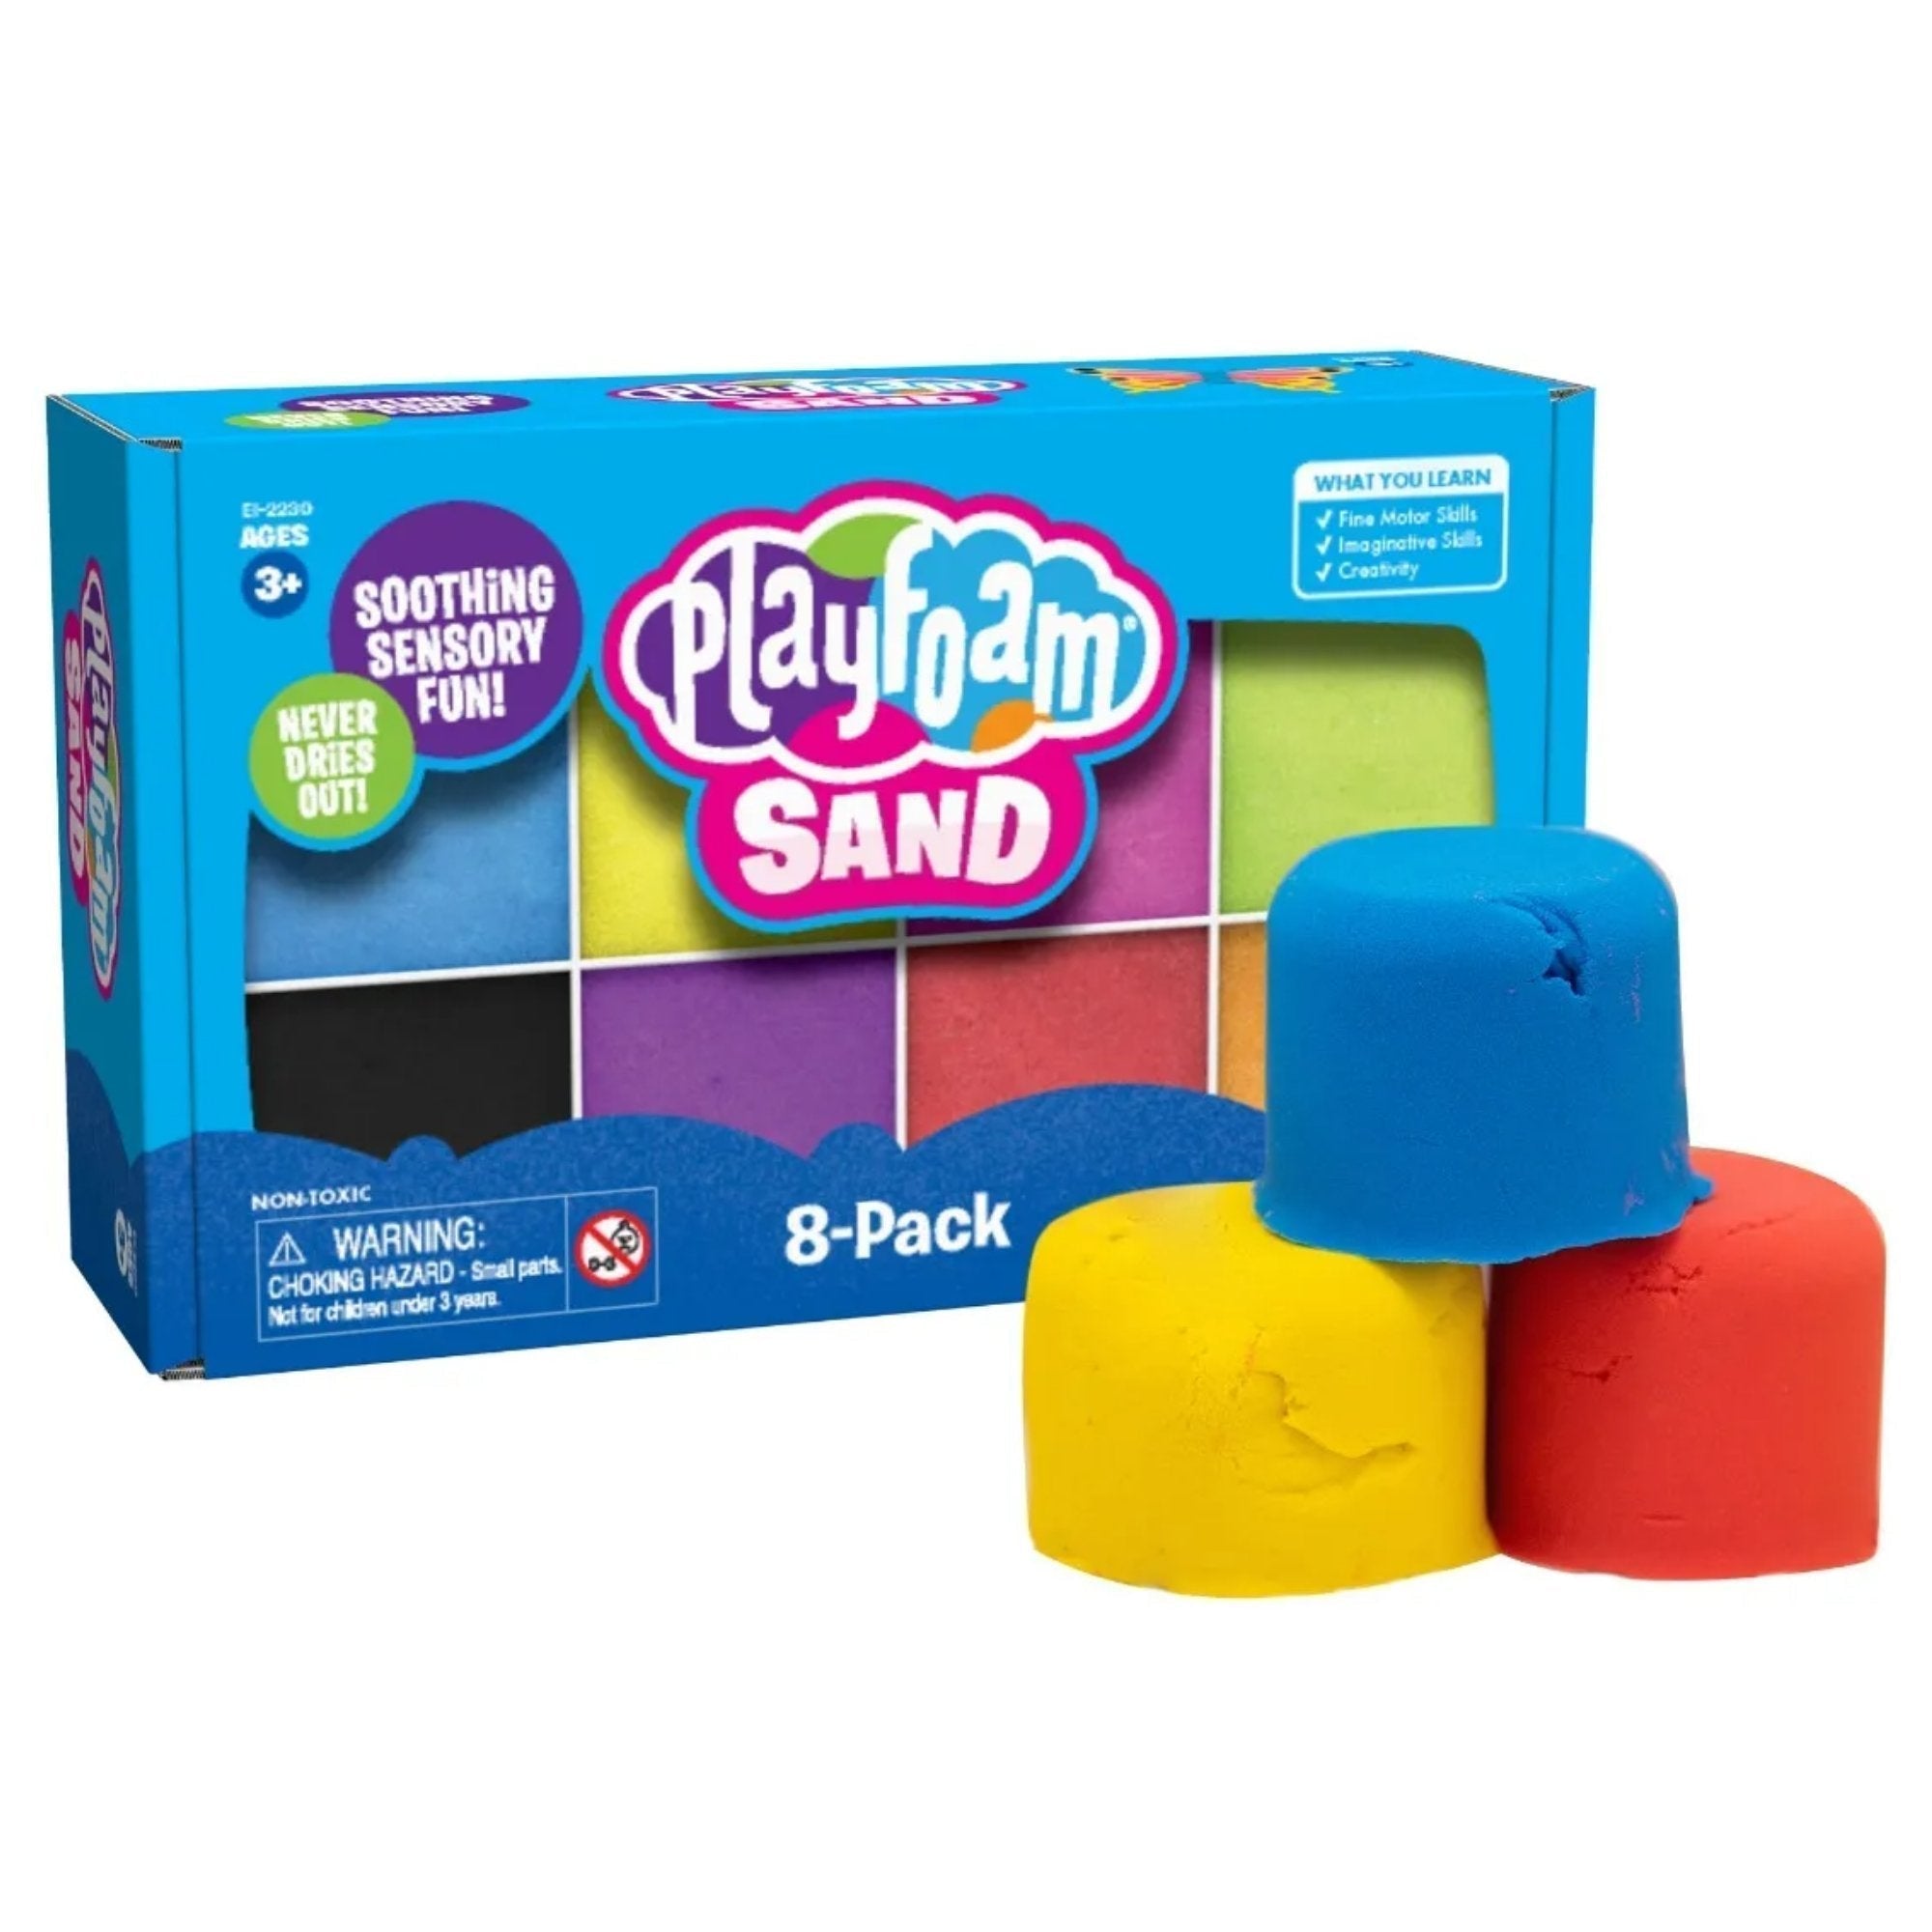 Playfoam Sand 8-Pack, Sink into some seriously soft sculpting shaping fun with Playfoam® Sand.This tactile play sand can be sculpted, squished, and moulded like wet sand, and sifted and scooped like dry sand, making Playfoam Sand perfect for sensory play in the classroom or at home. What’s more, as little hands squish, sculpt, and more, they’re building fine motor skills and hand strength. Sink into soft play sand that’s perfect for shaping, moulding, sculpting, and sifting, anywhere, anytime with Playfoam 